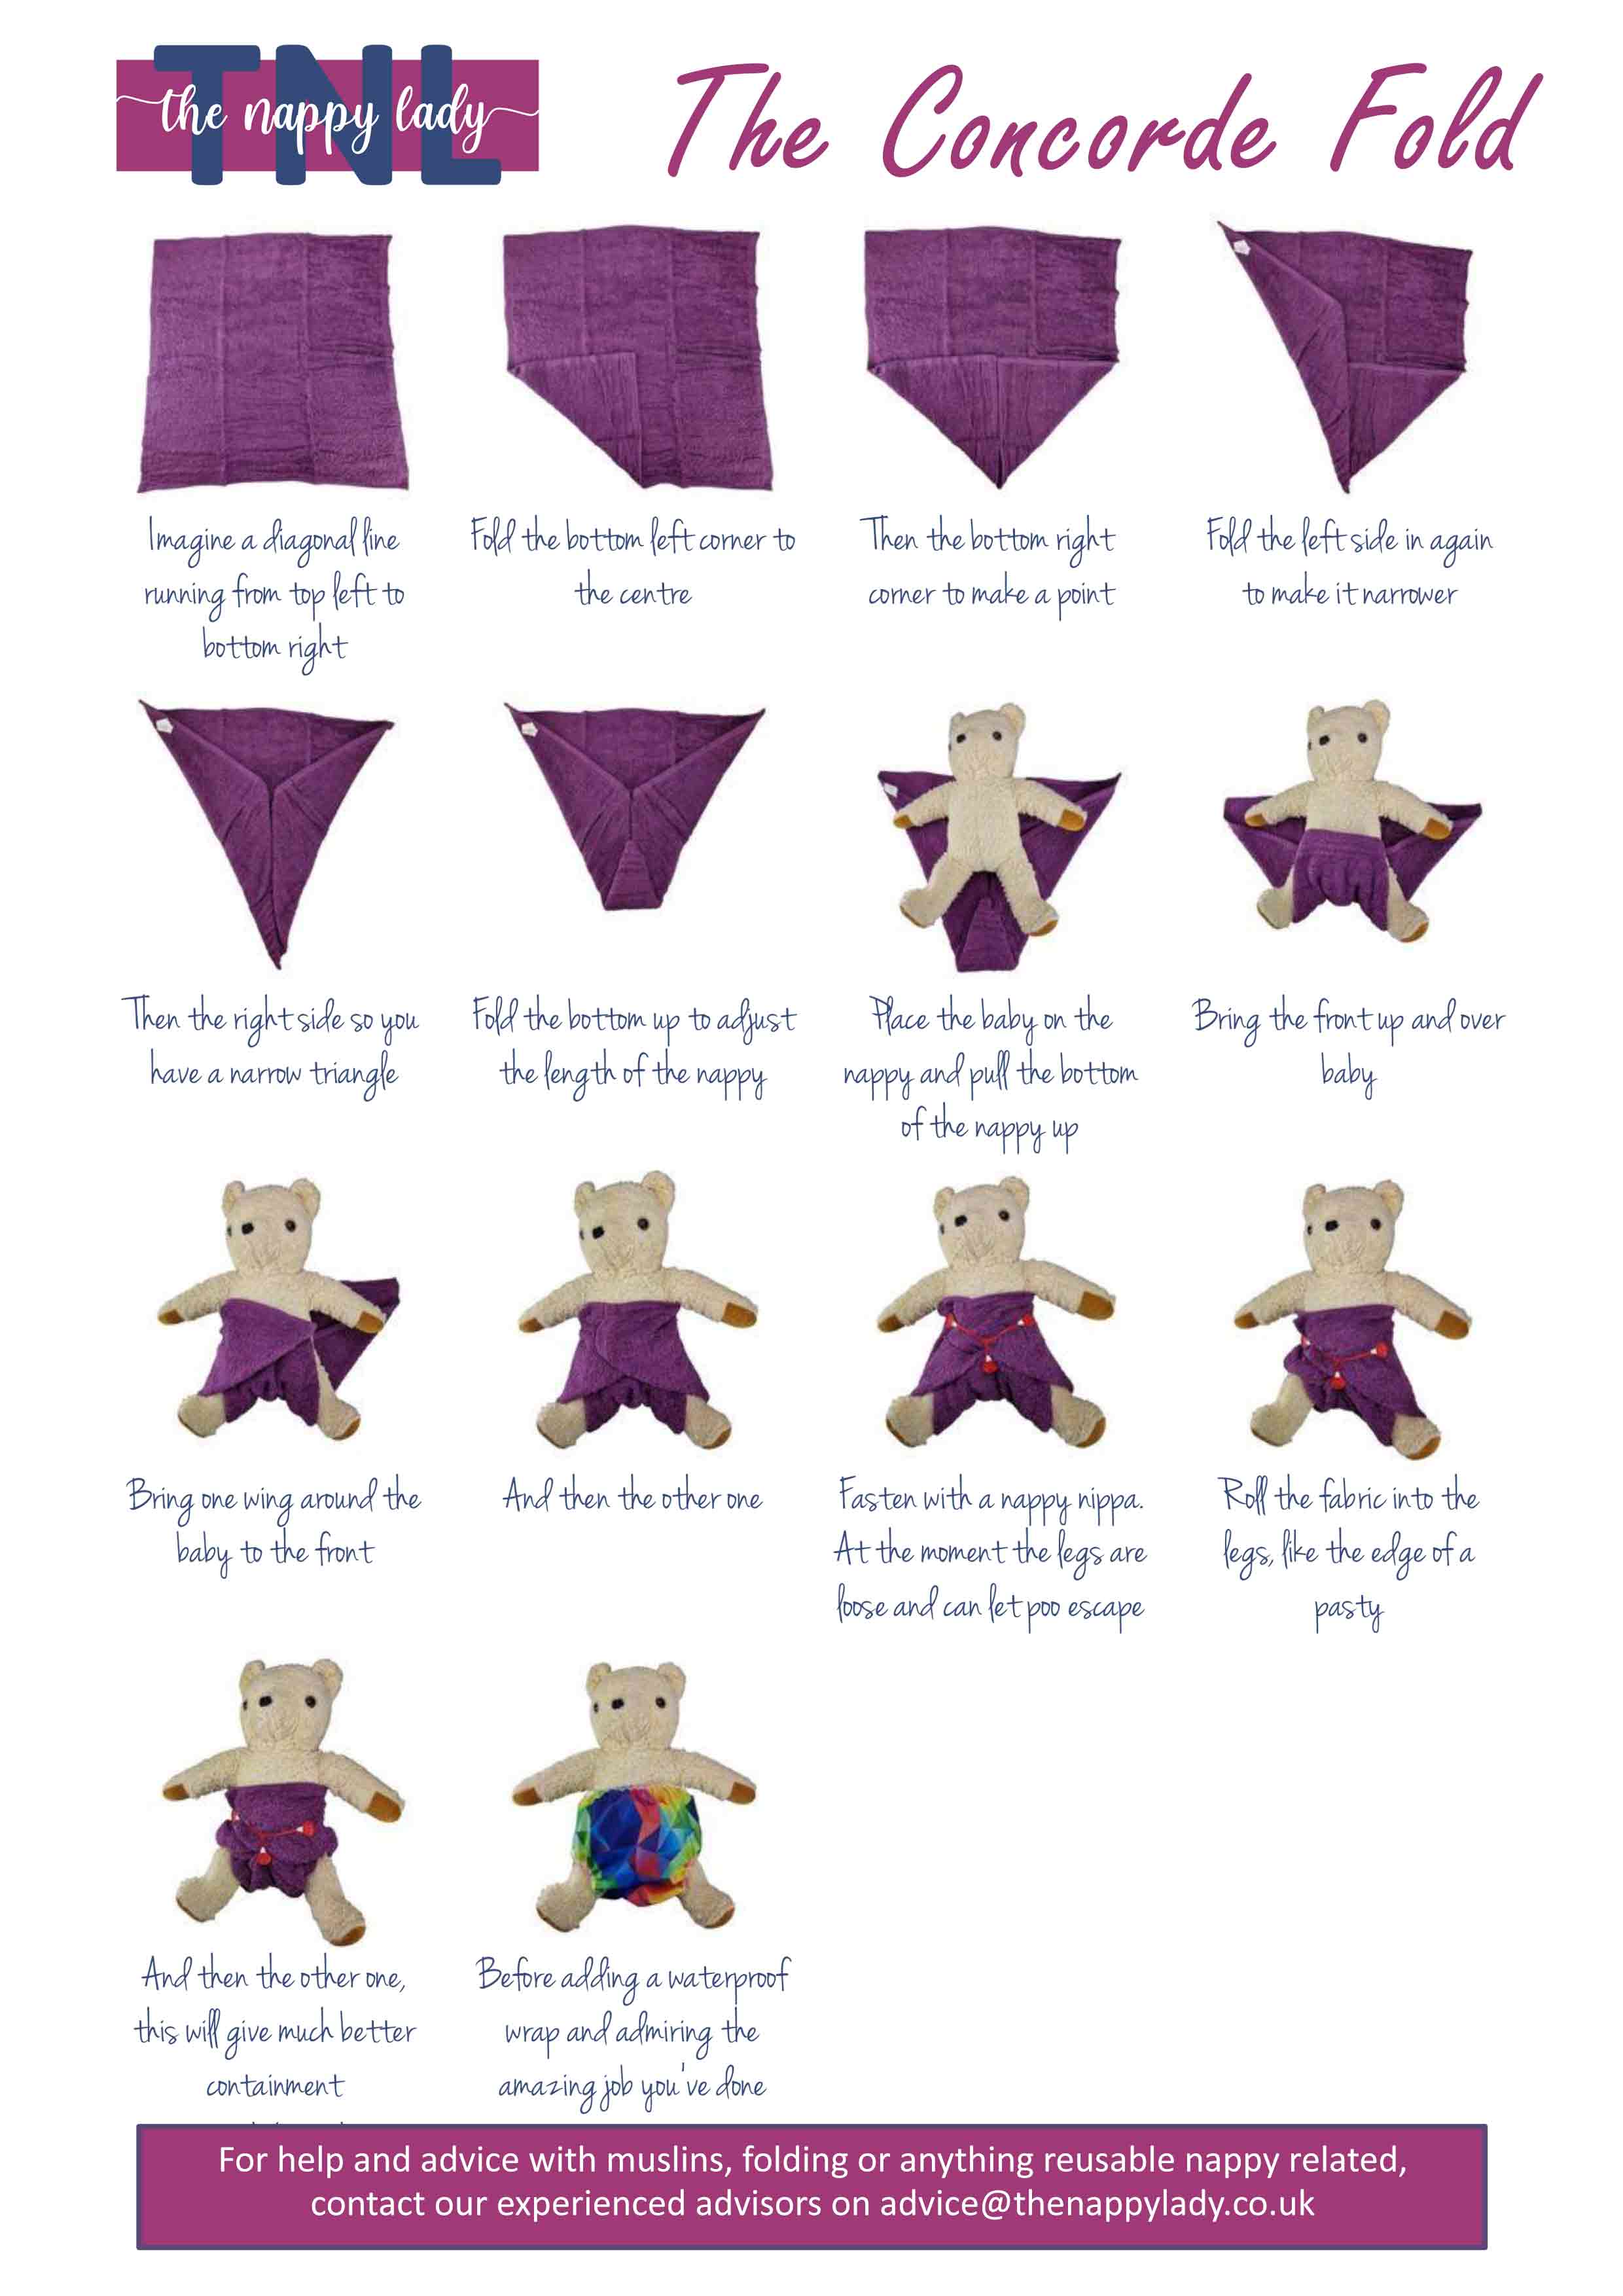 Photo guide on how to fold a terry square